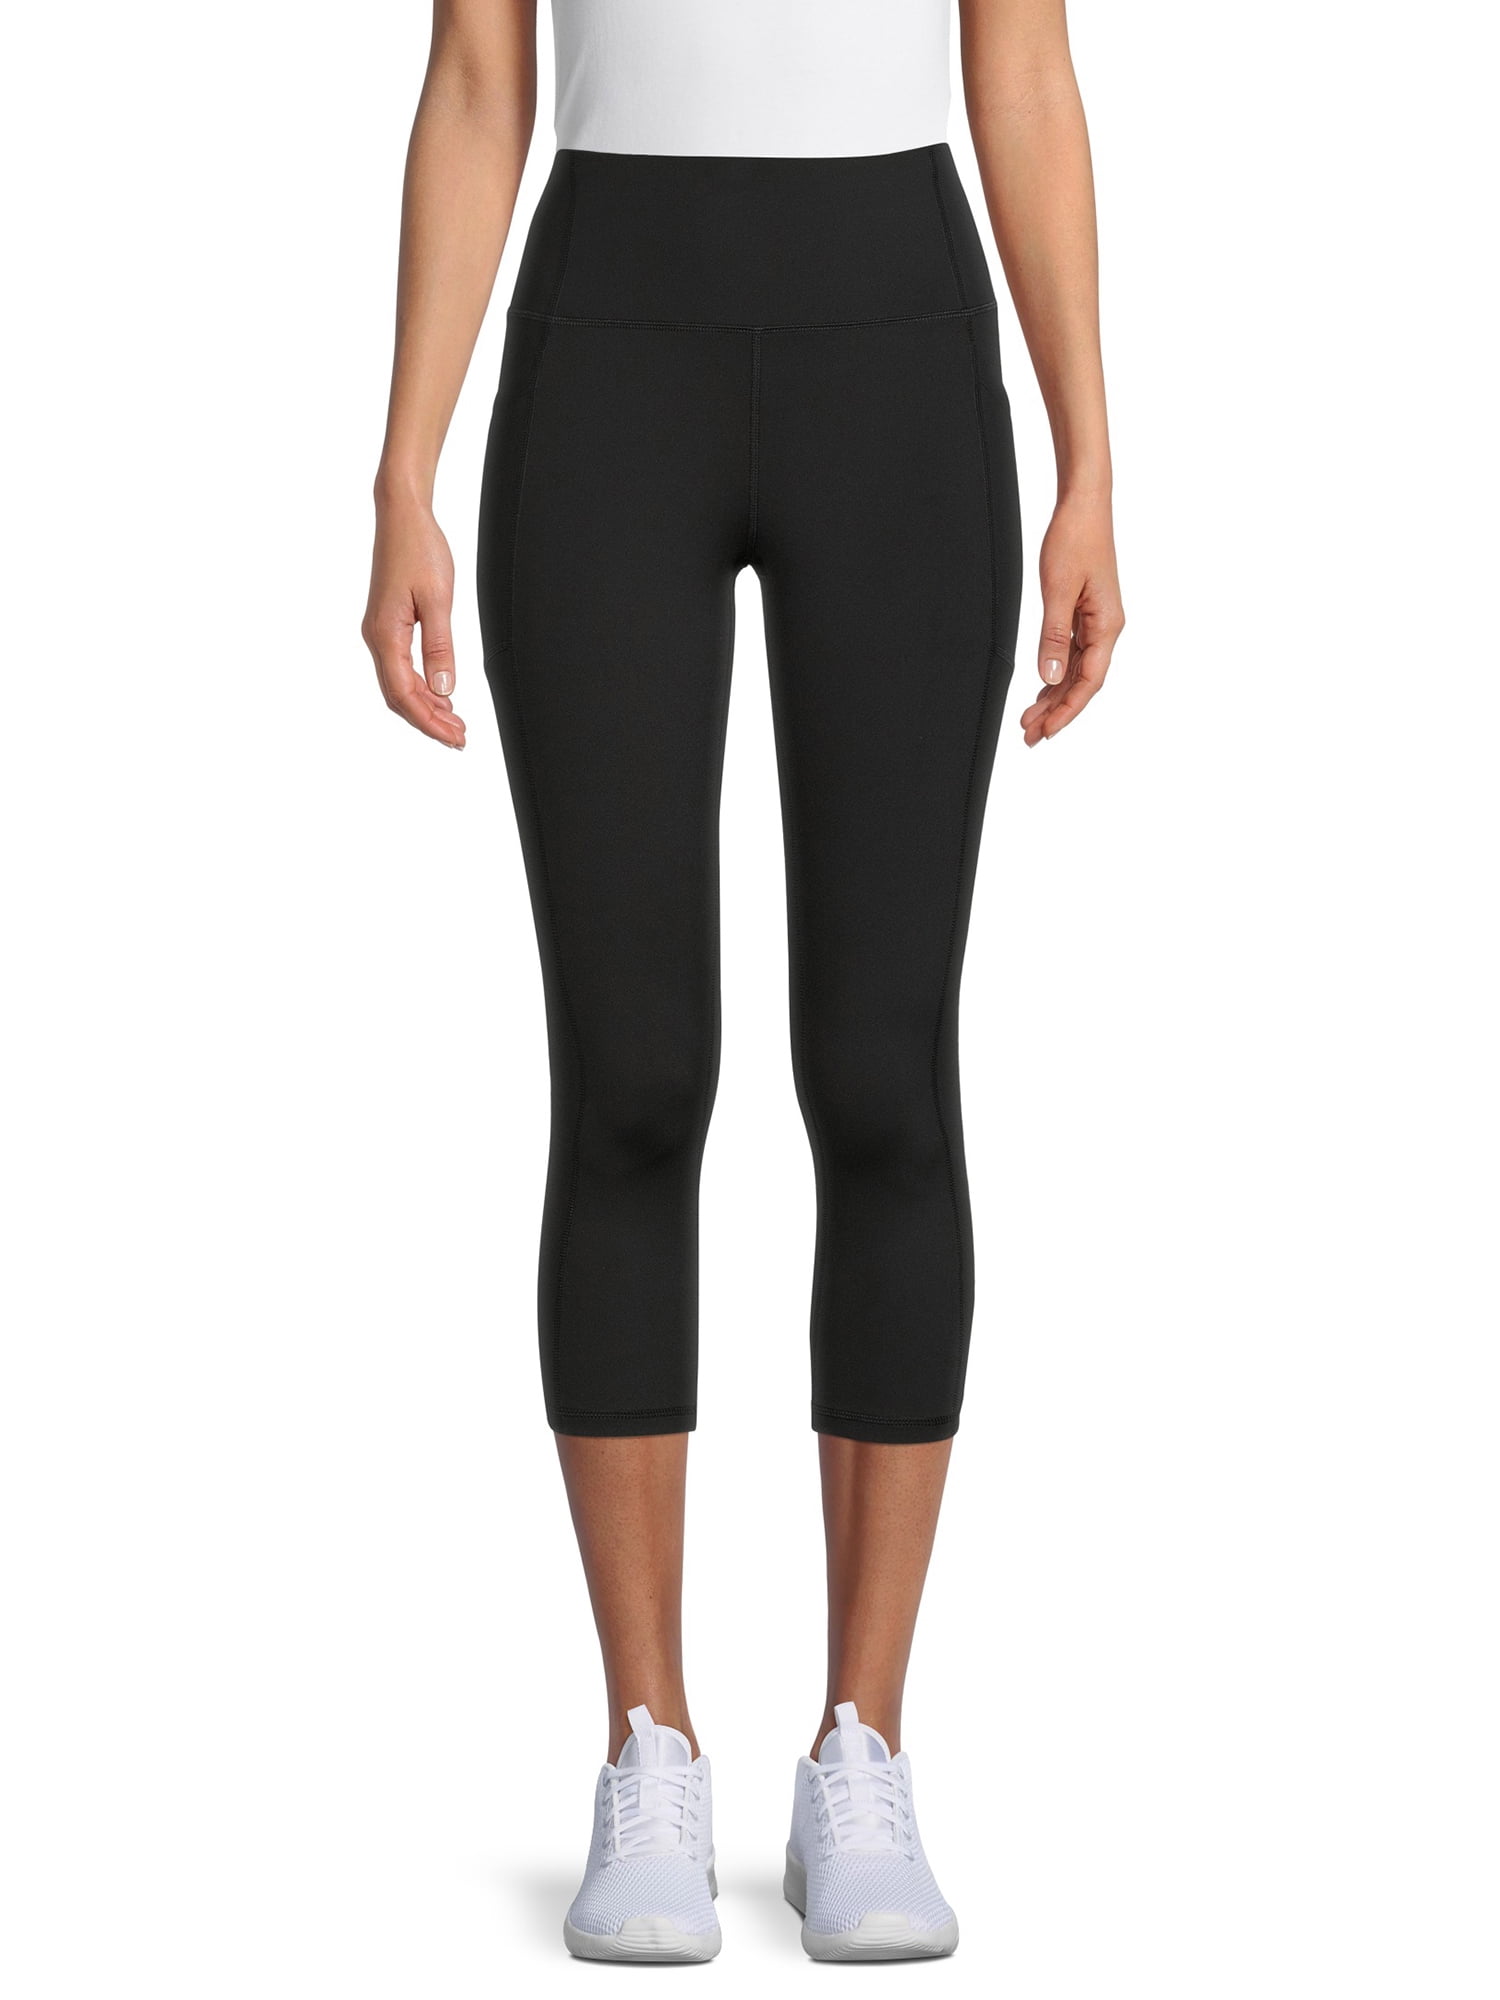 Avia Women's 25 Length High Rise Crop Legging with Side Pockets